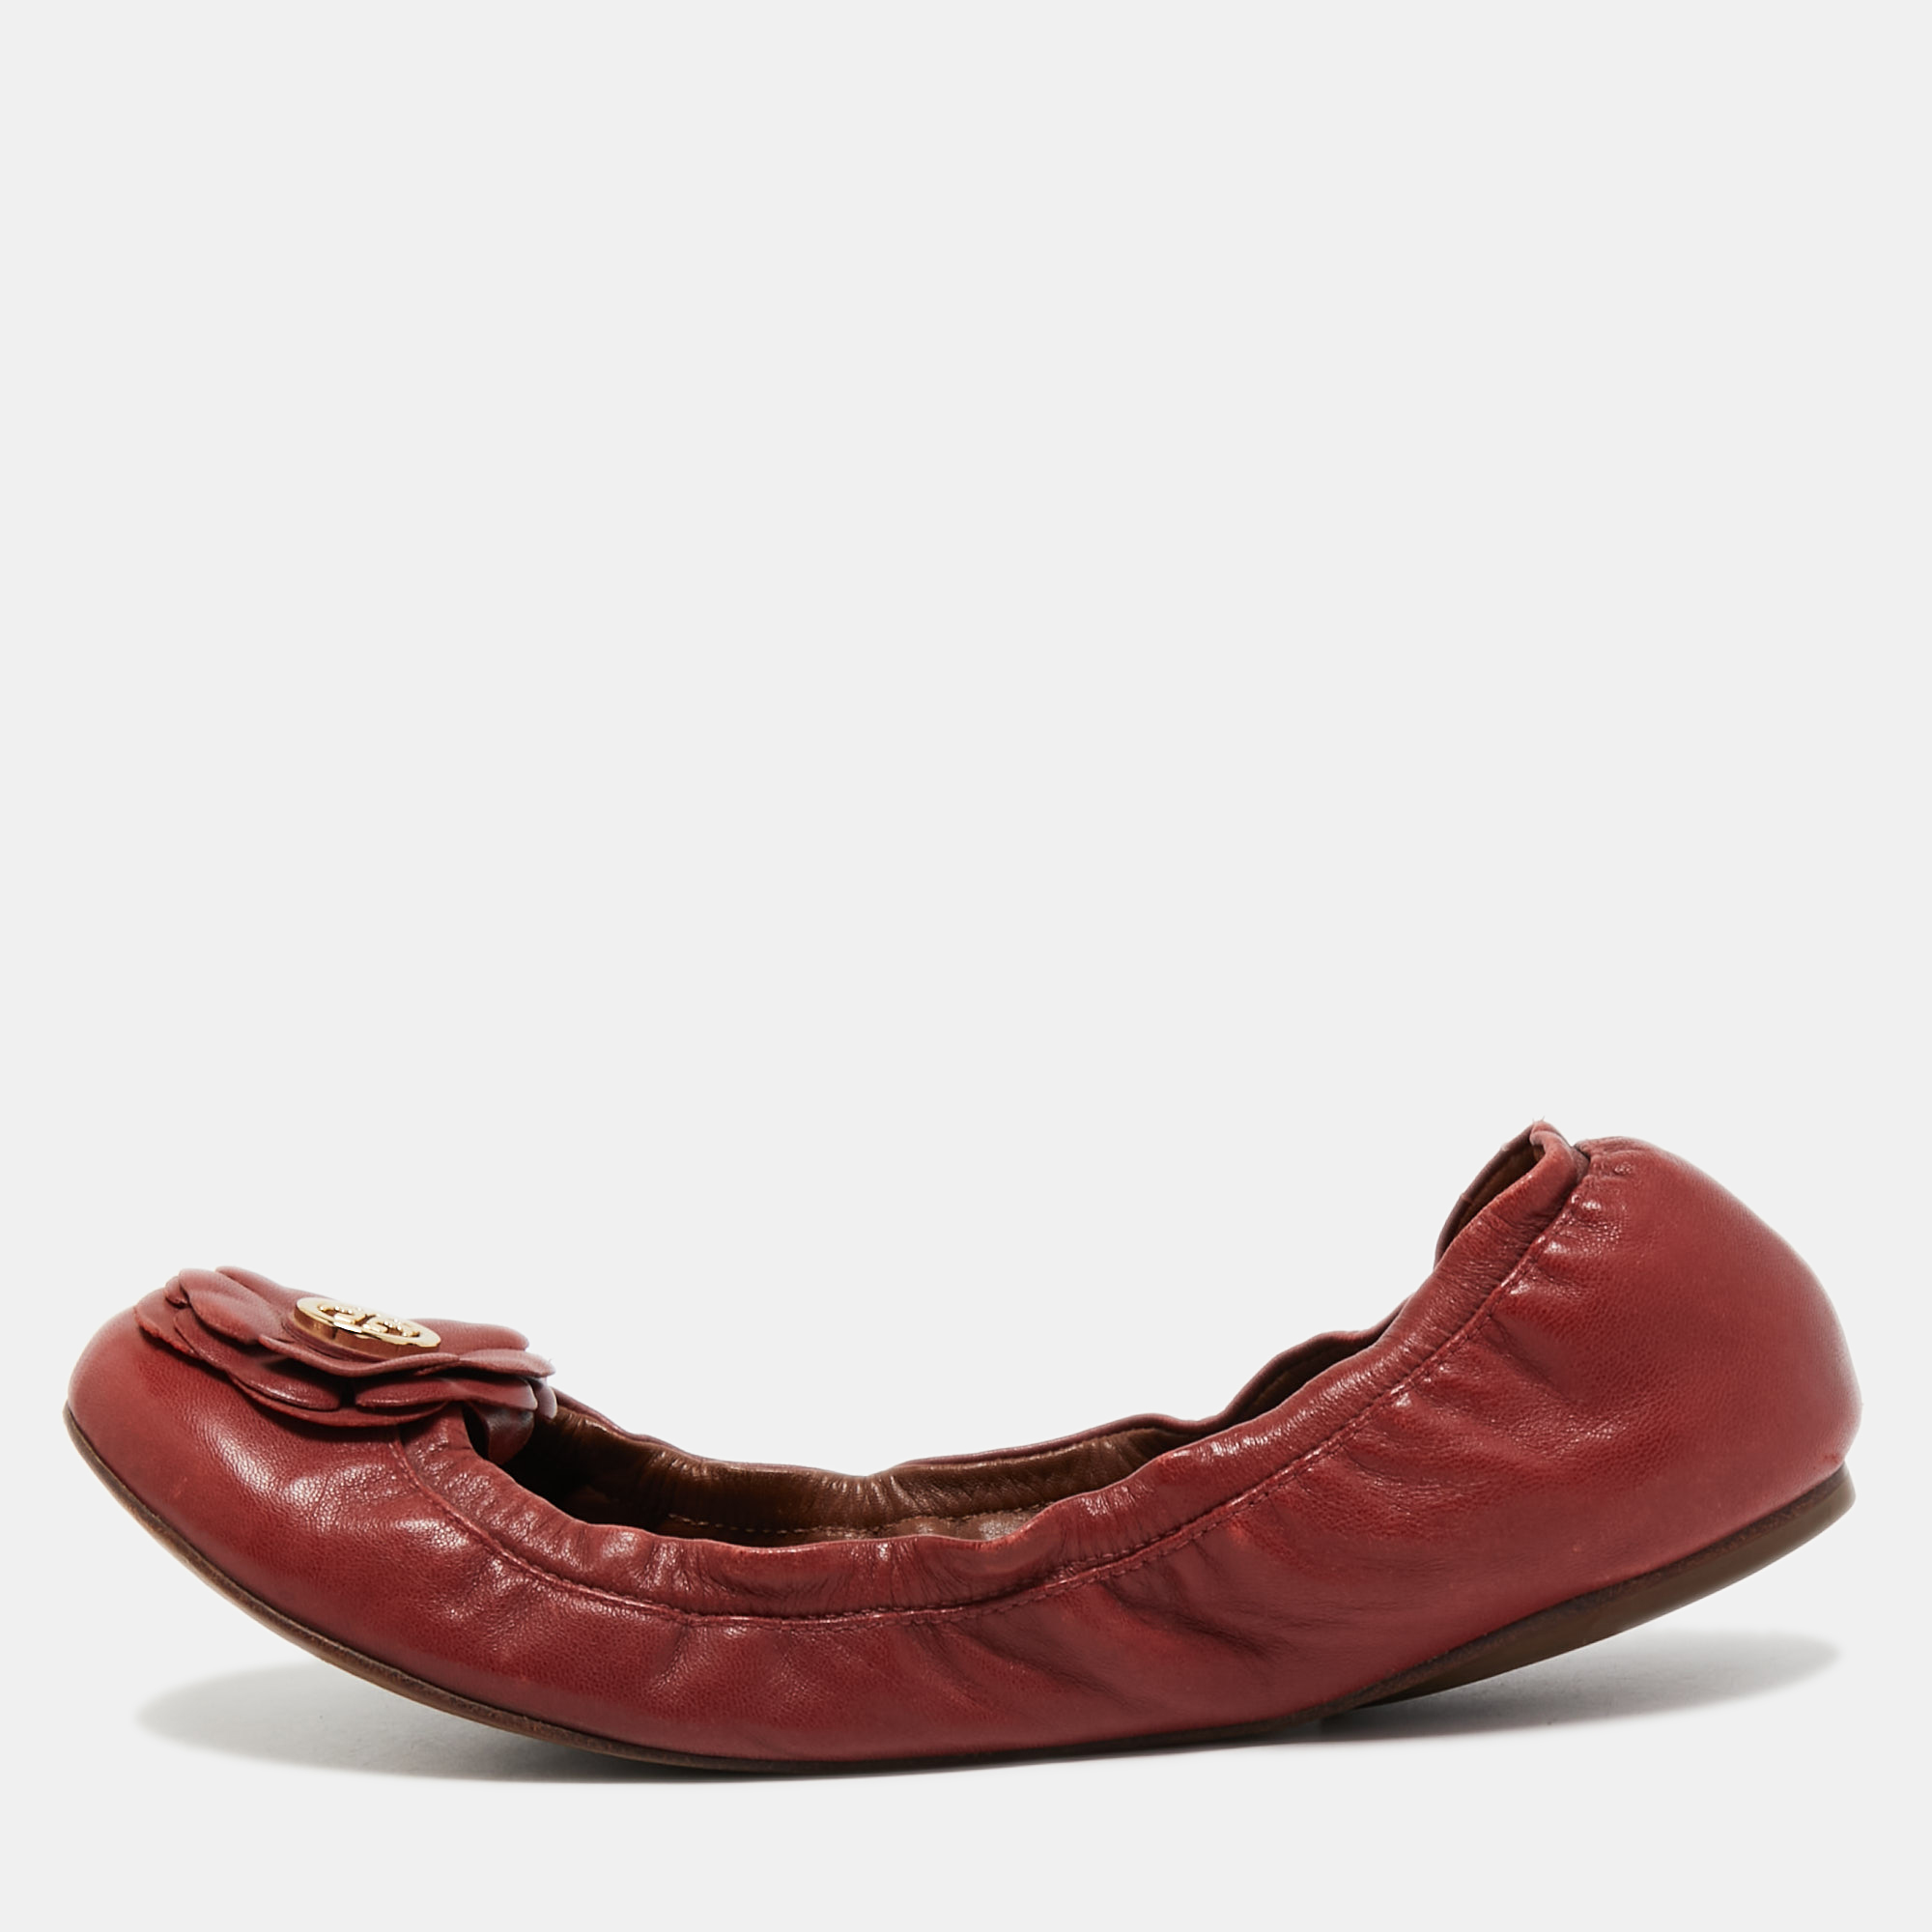 Pre-owned Tory Burch Red Leather Shelby Scrunch Ballet Flats Size 40